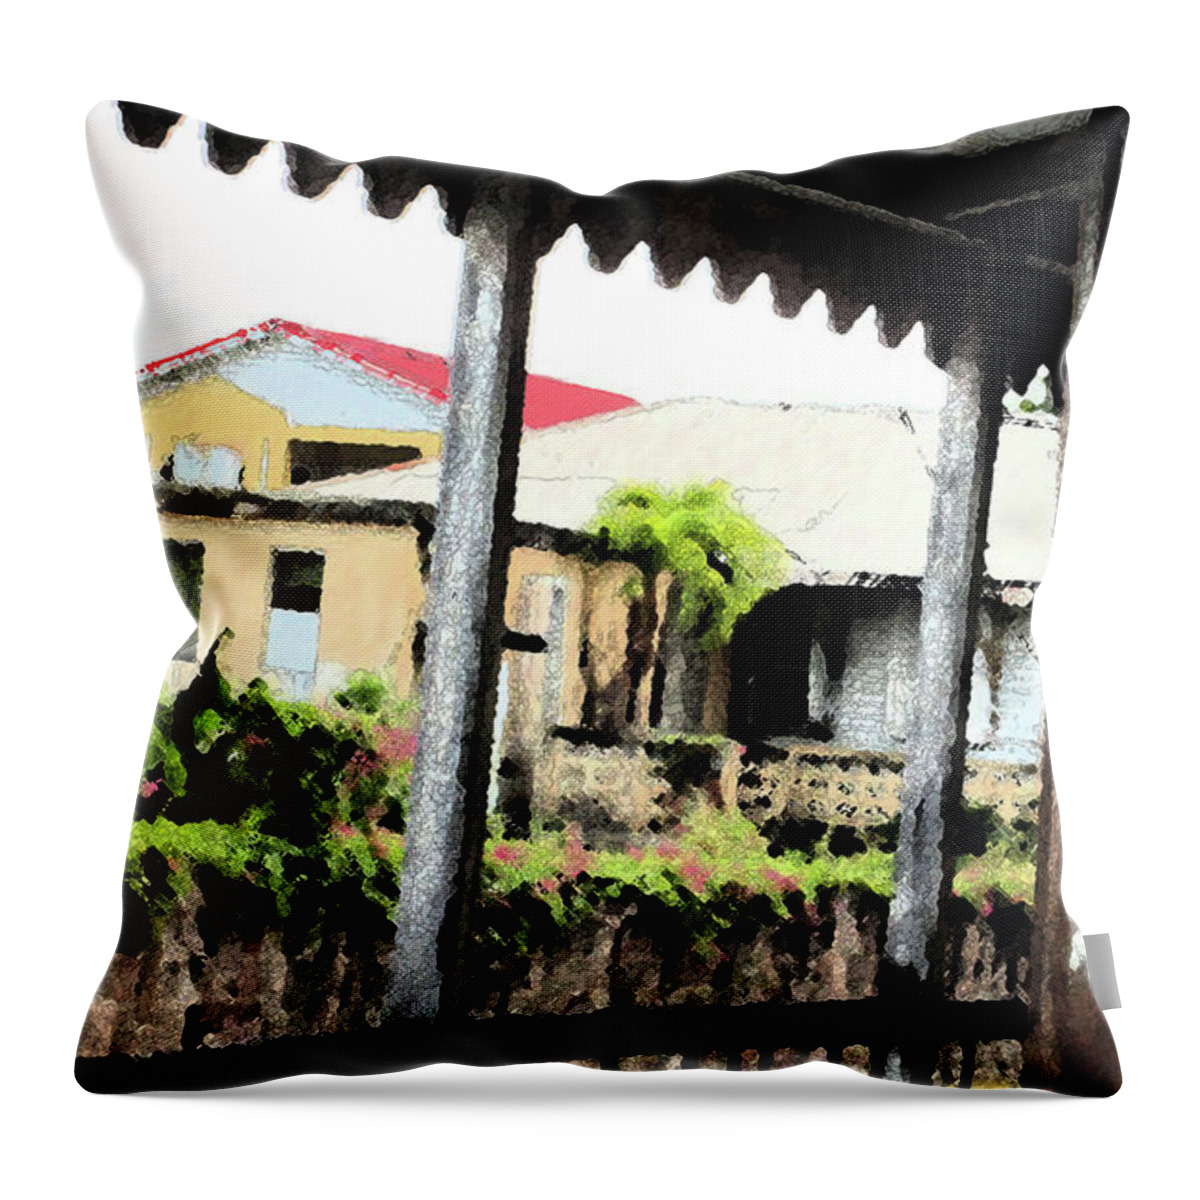 Caribbean Throw Pillow featuring the photograph From The Tailors Porch by Ian MacDonald